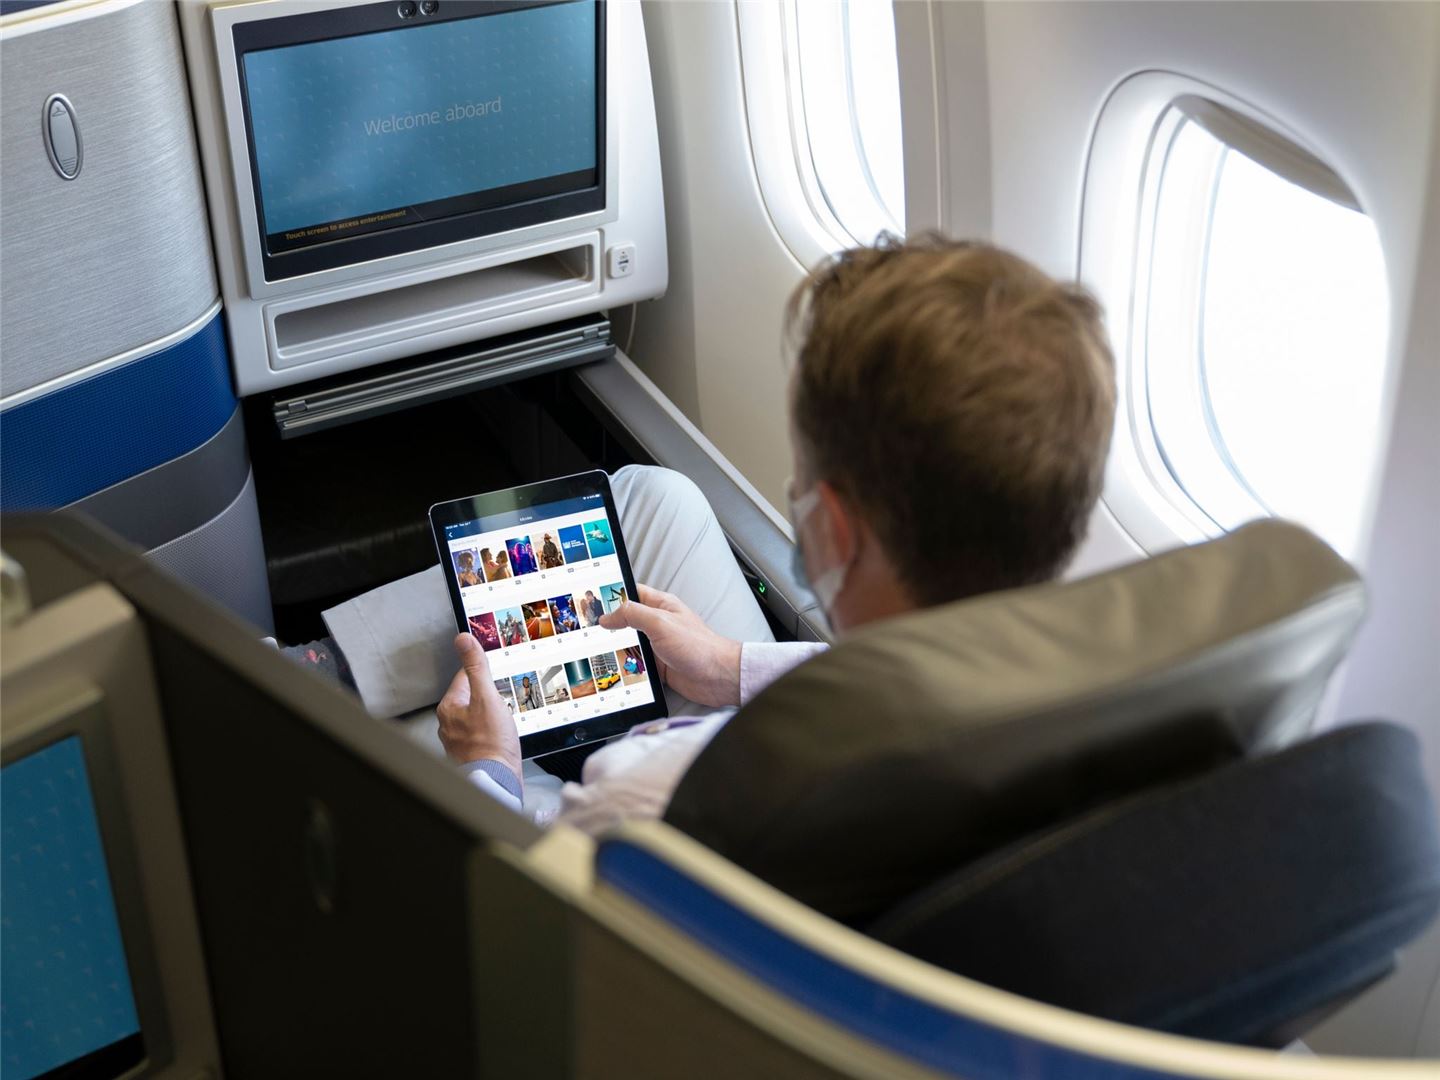 United Airlines seatback entertainment system onboard 